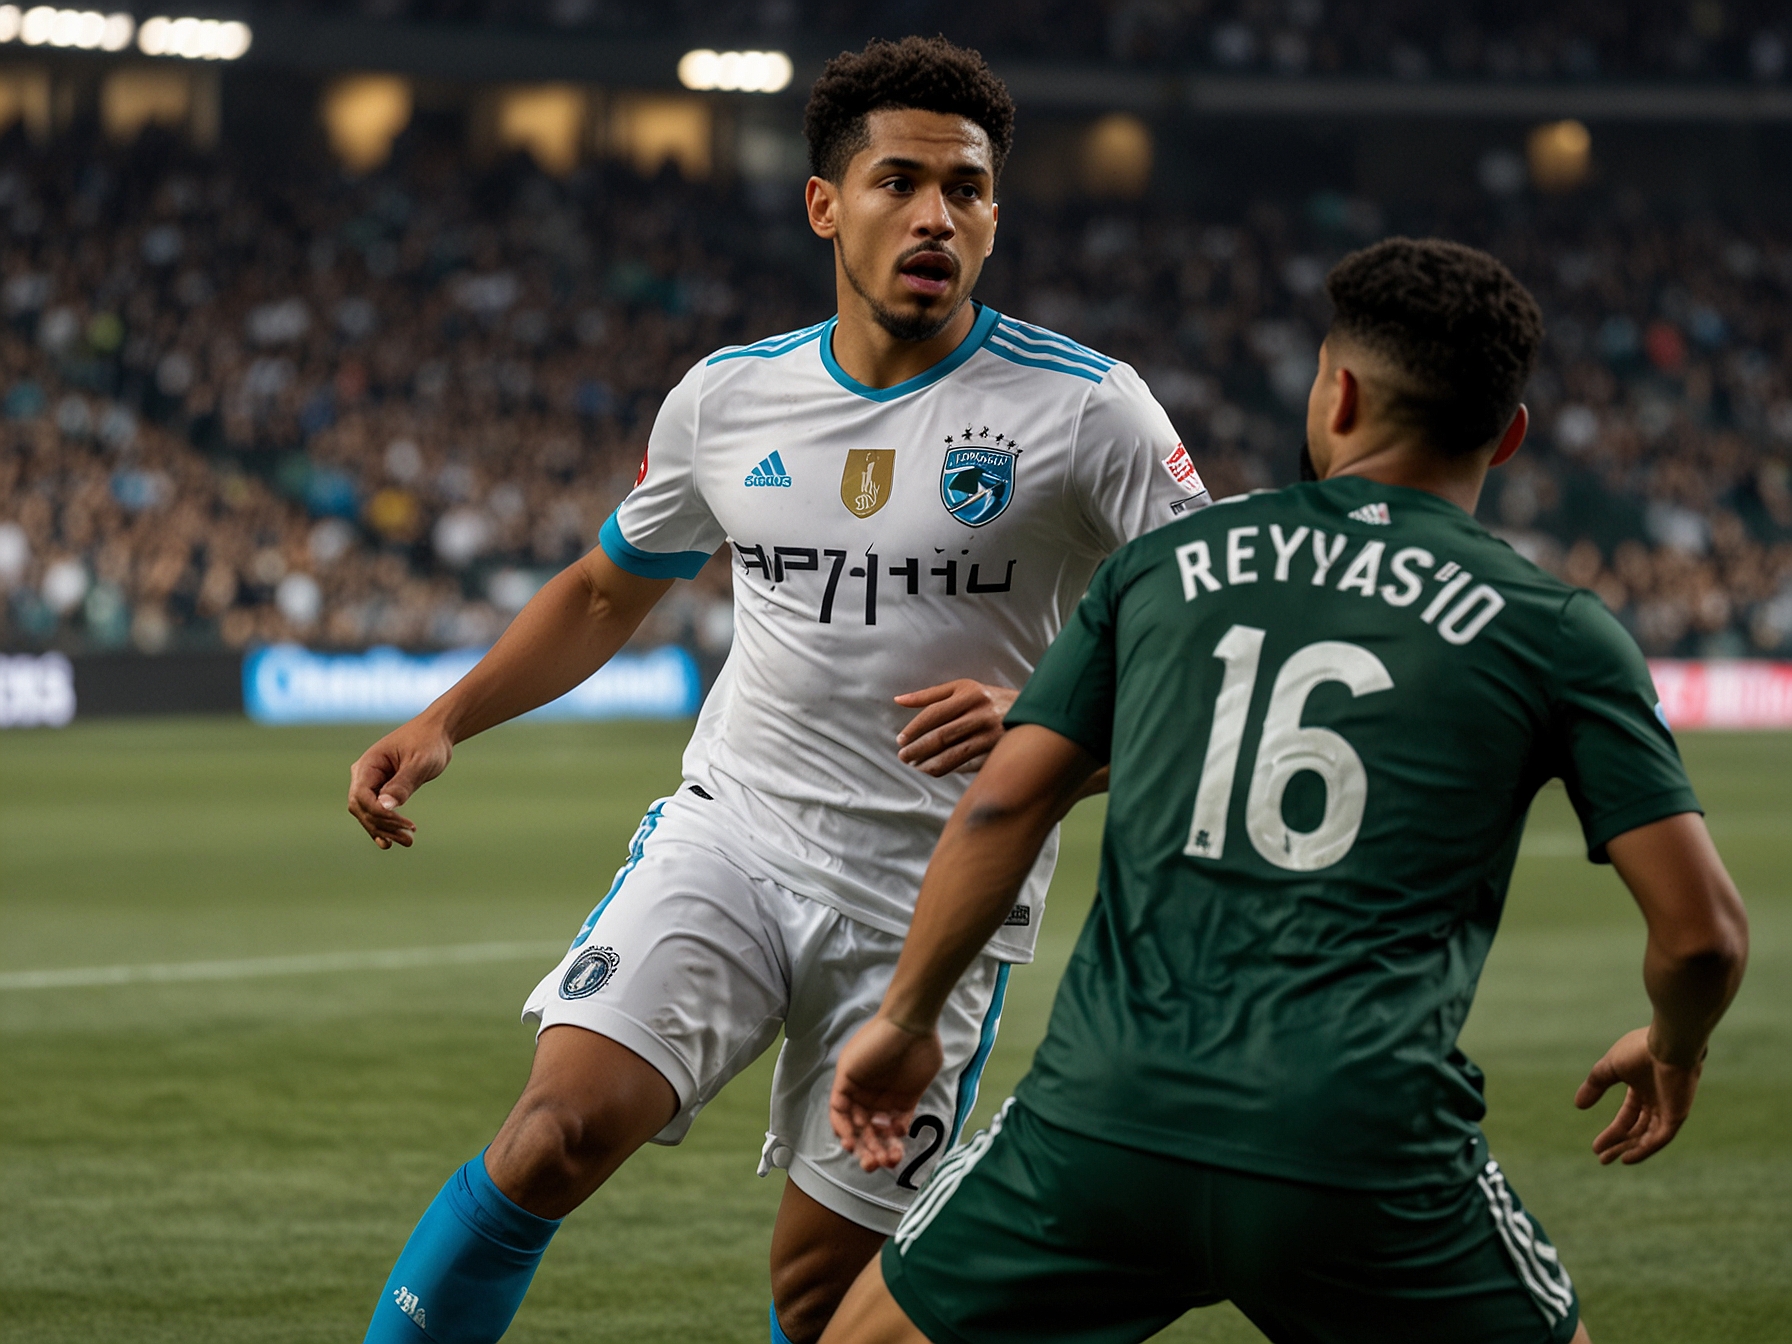 A tense moment in the match as Minnesota United's Emanuel Reynoso maneuvers past Portland Timbers defenders, illustrating the intense and competitive nature of the soccer game.